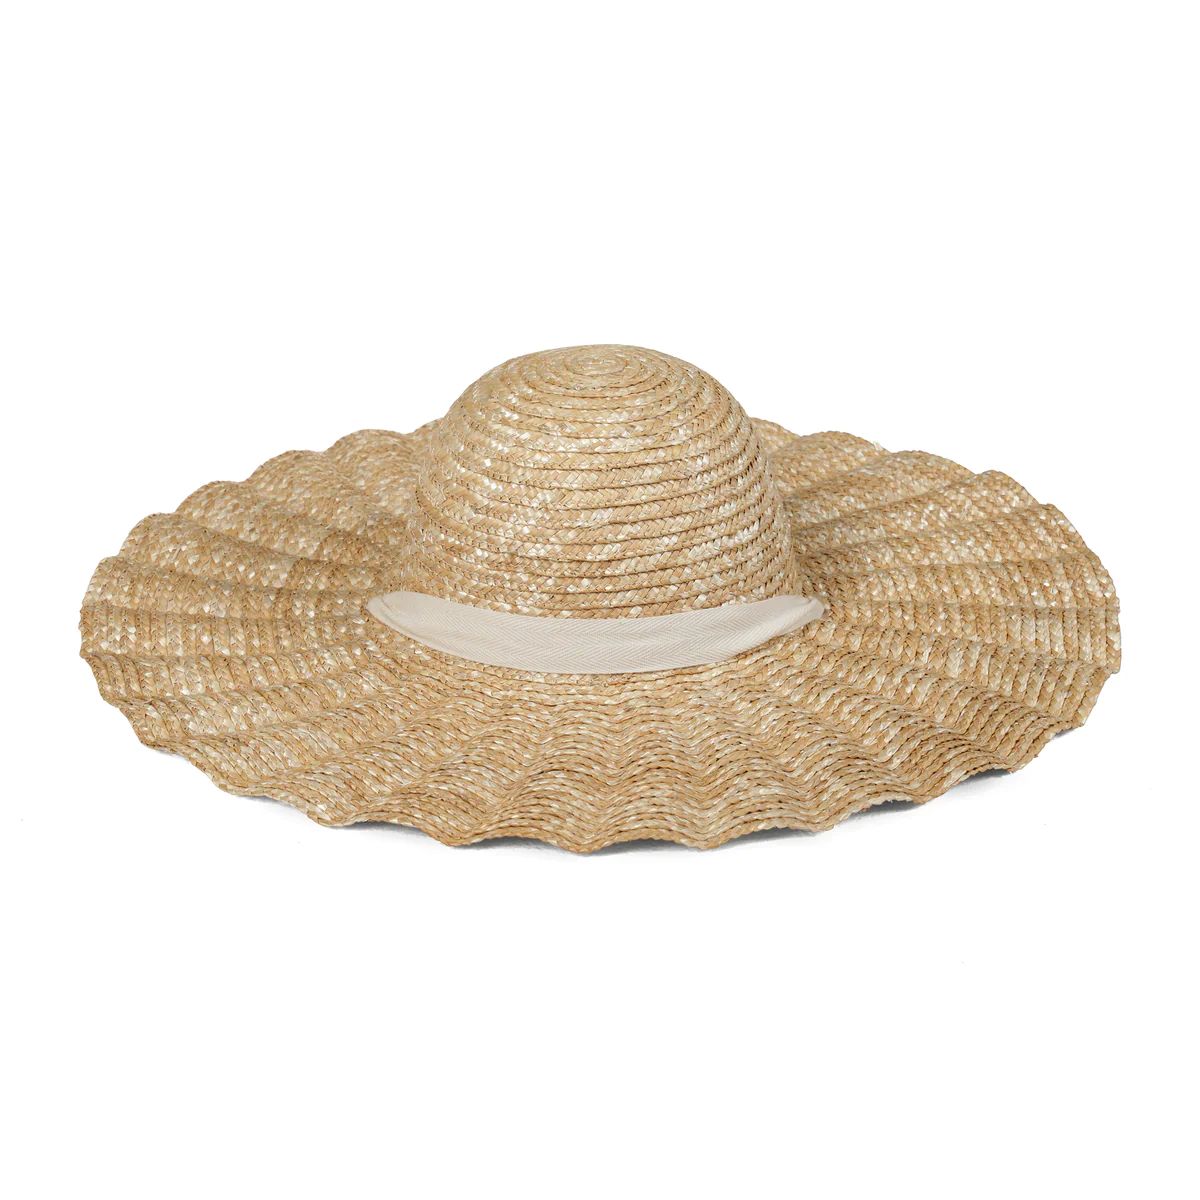 Scalloped Dolce Hat - Straw Boater Hat in Natural | Lack of Color US | Lack of Color